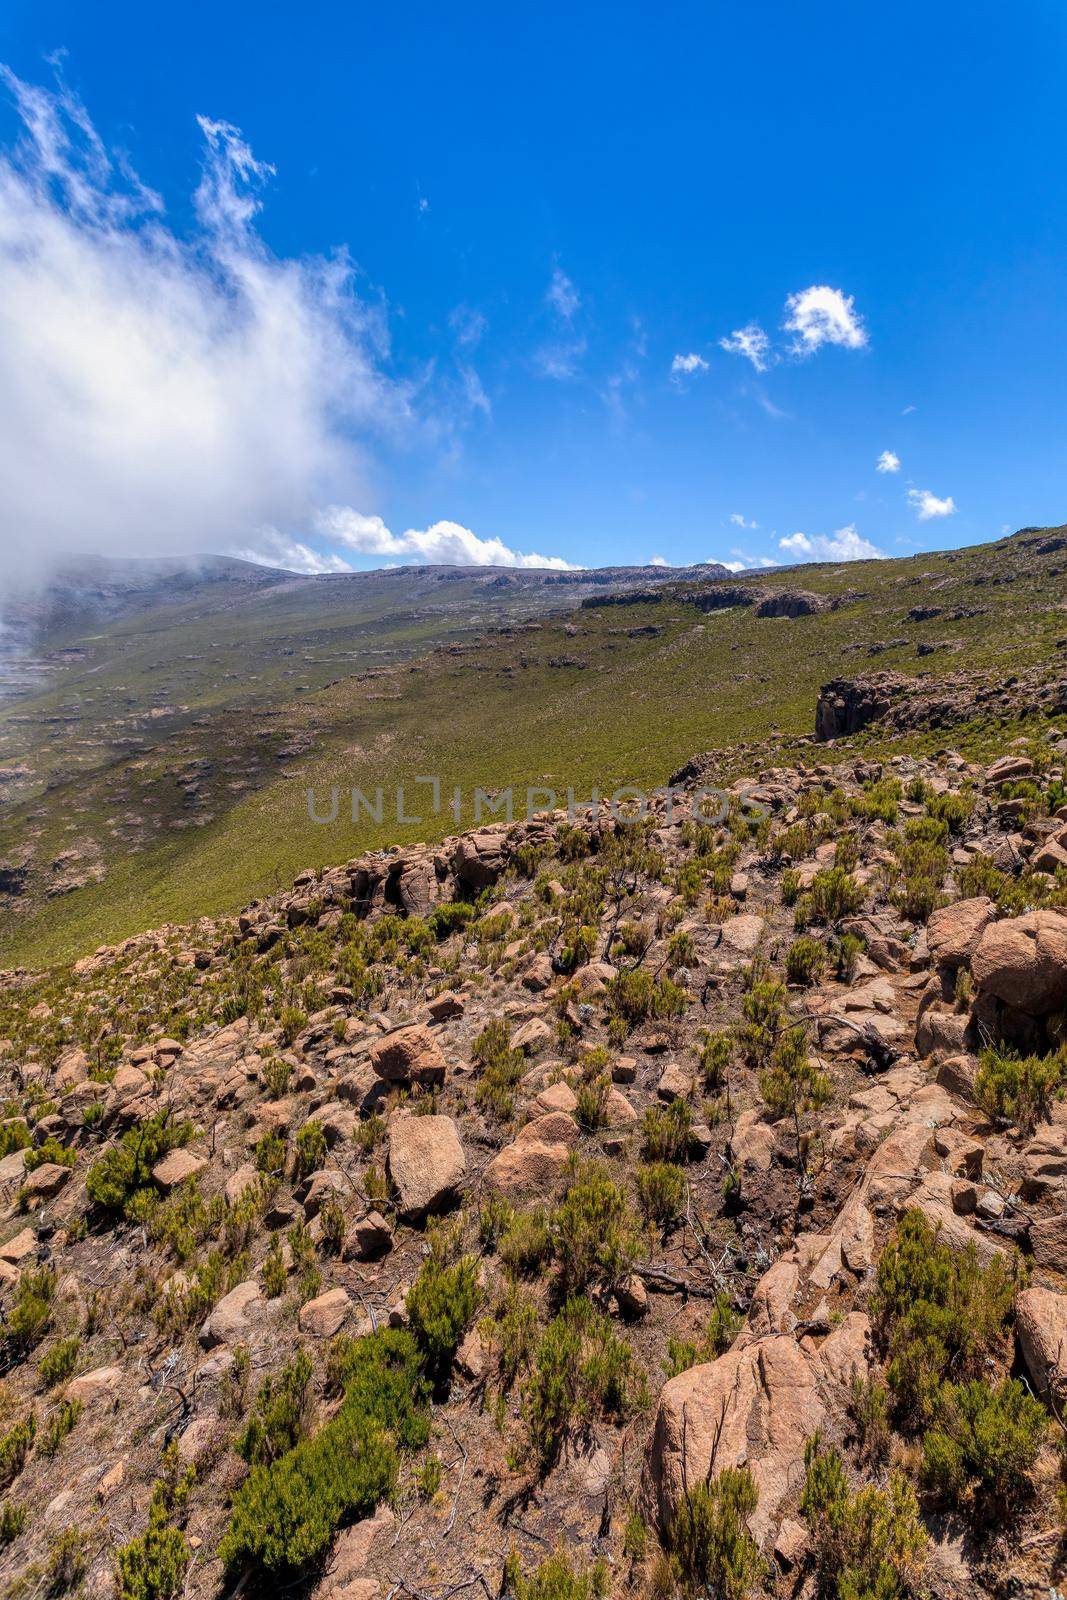 Ethiopian Bale Mountains National Park landscape. Ethiopia wilderness pure nature. Sunny day with blue sky and mist.